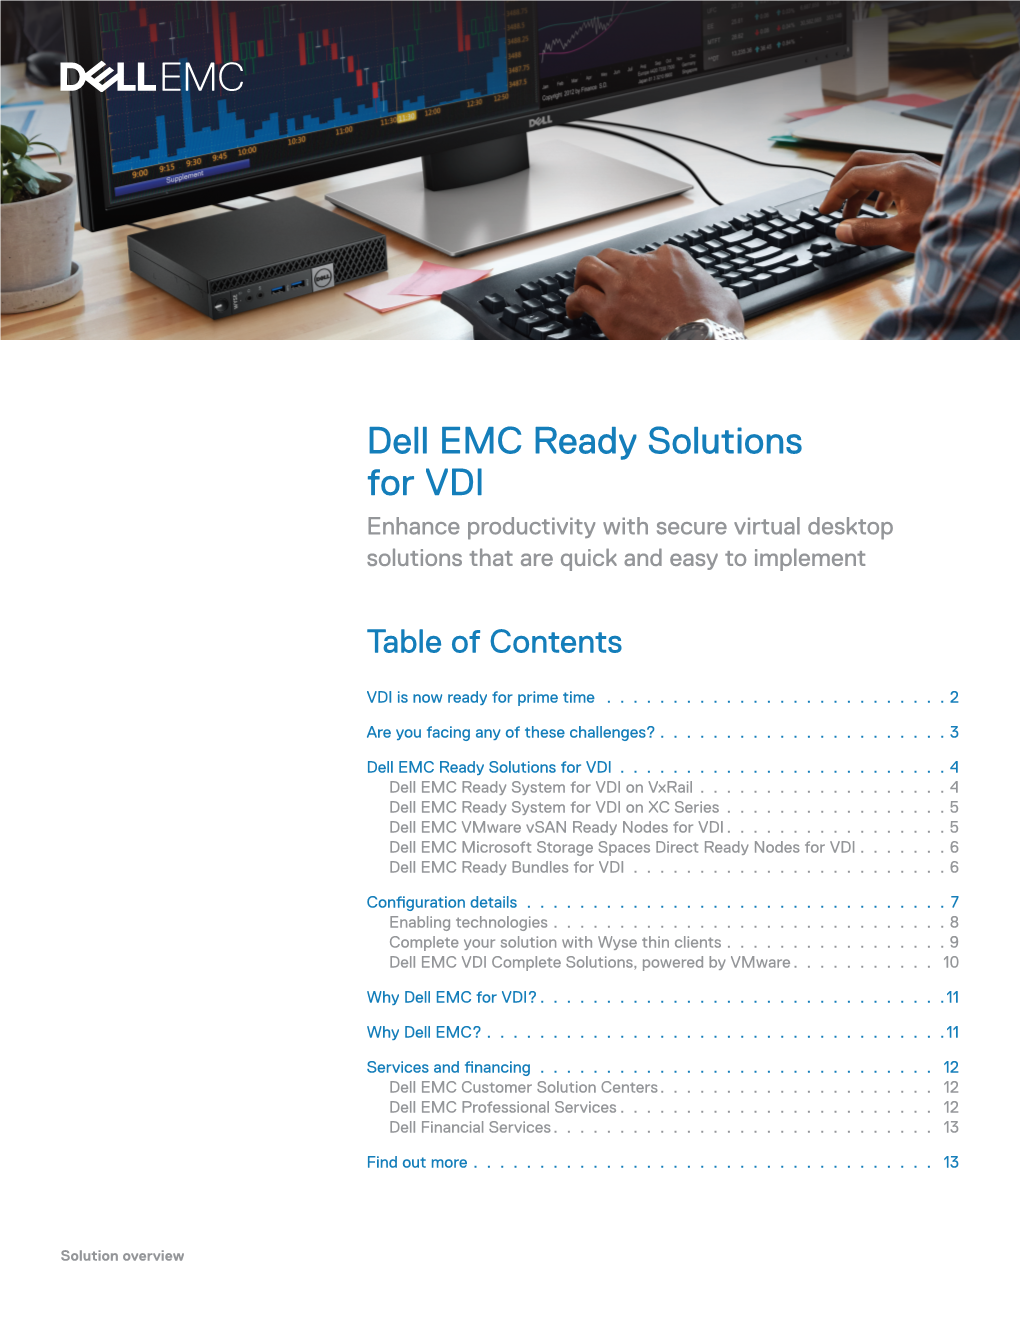 Dell EMC Ready Solutions for VDI Enhance Productivity with Secure Virtual Desktop Solutions That Are Quick and Easy to Implement